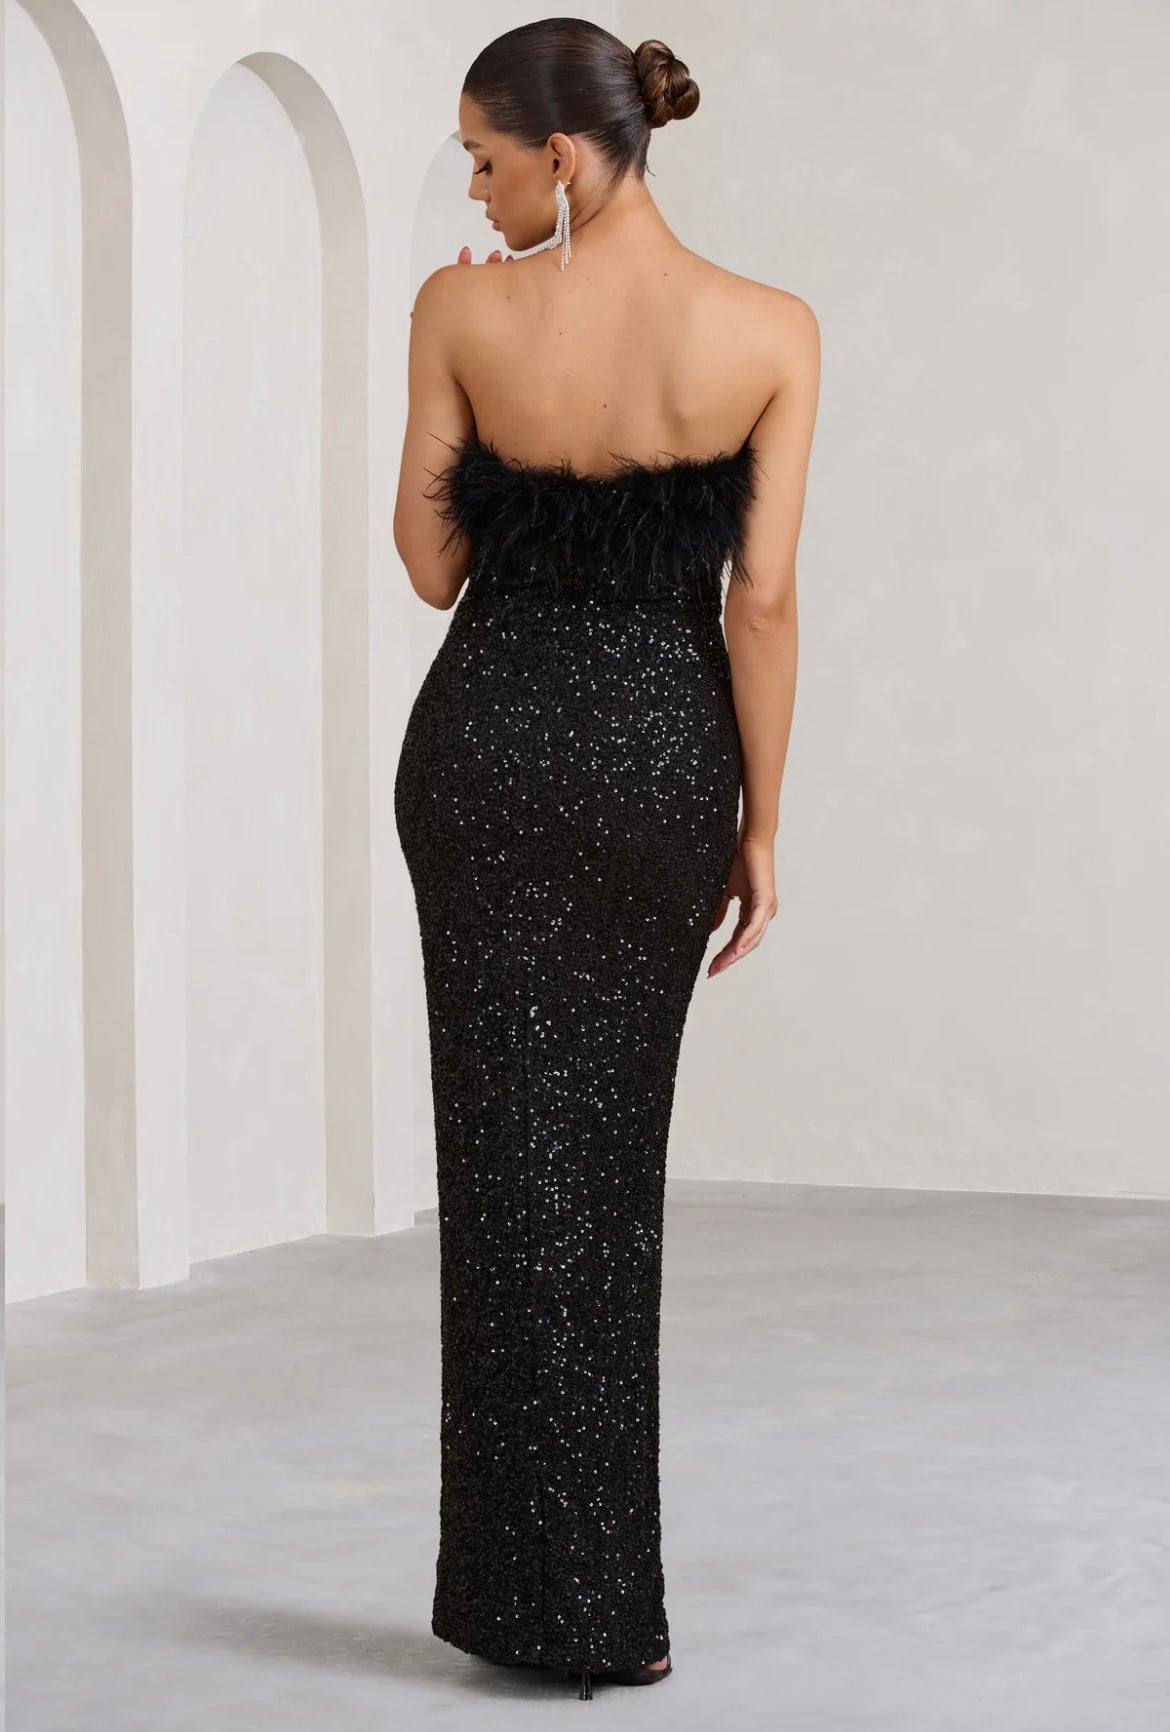 CLUB LONDON BLACK BODYCON SEQUIN MAXI DRESS WITH FEATHER TRIM